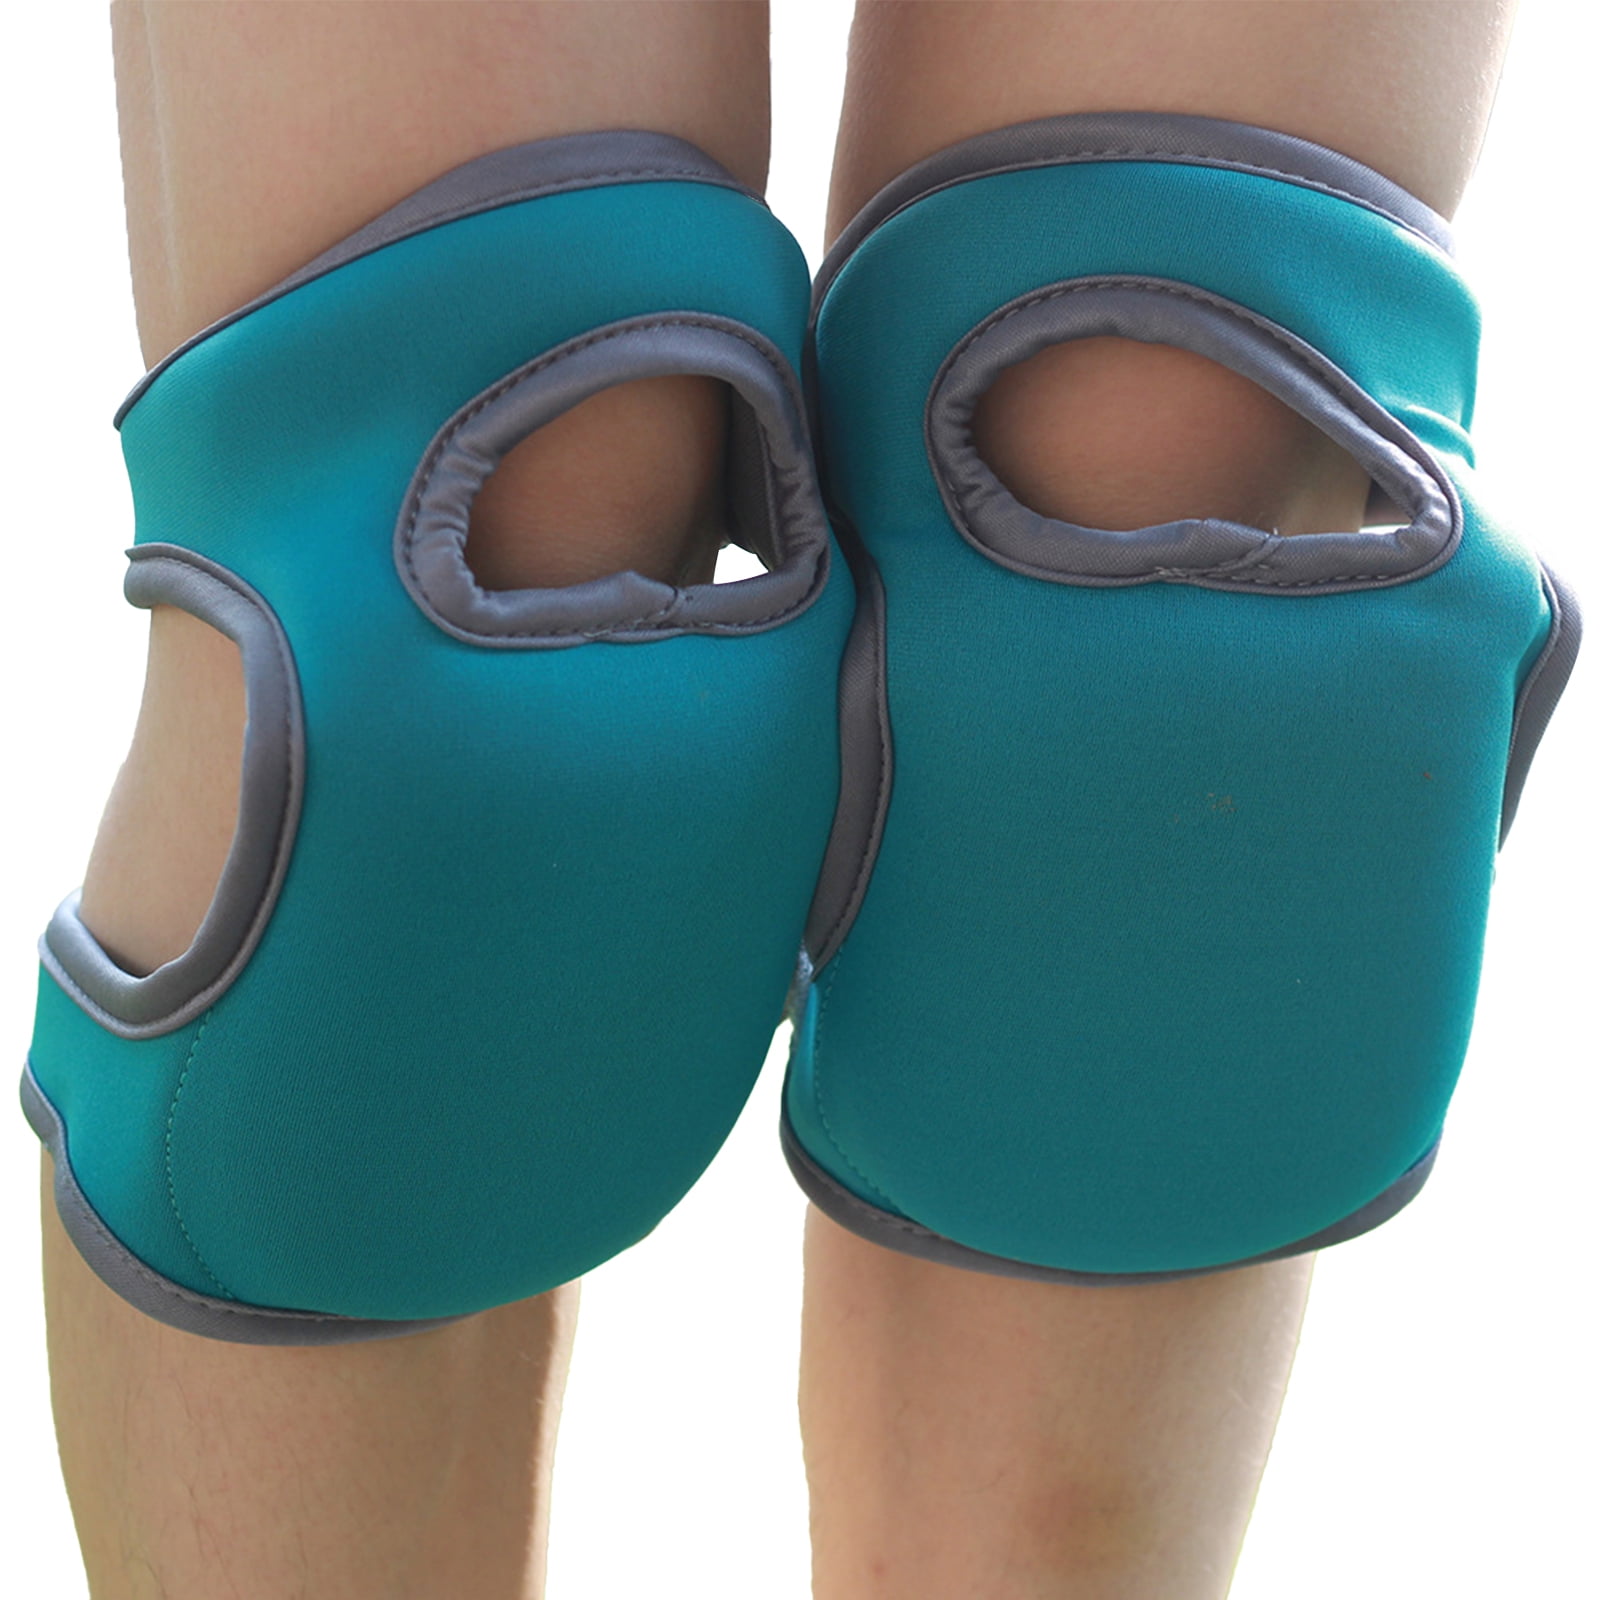 1 Pair Blue Strong Adjustable Strap Flooring and Roofing Knee Pads 